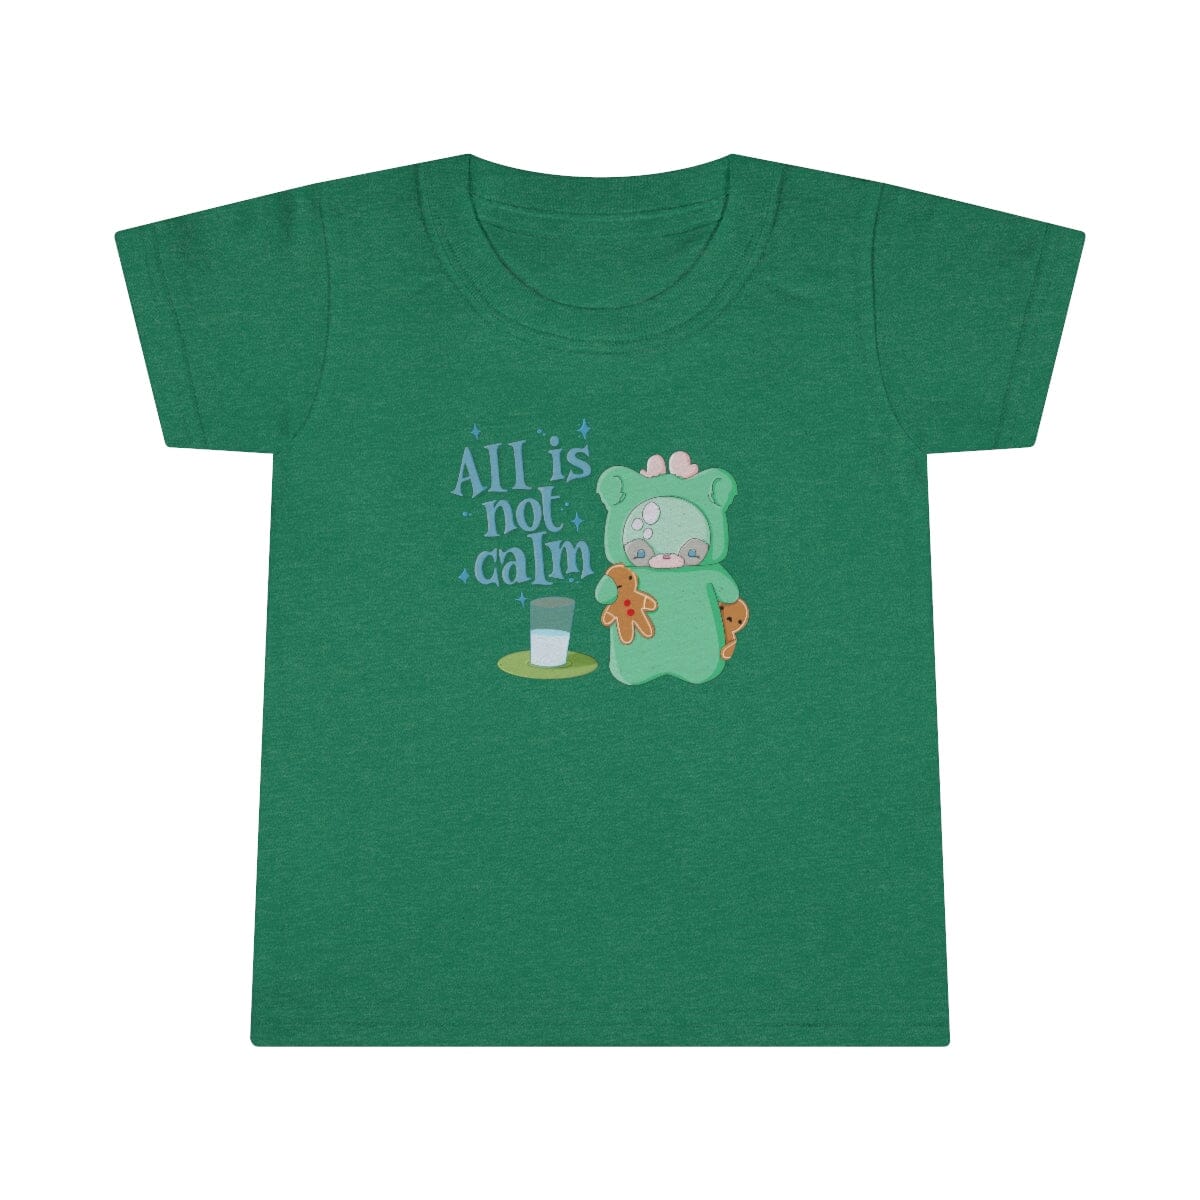 The Griswold Toddler T-shirt